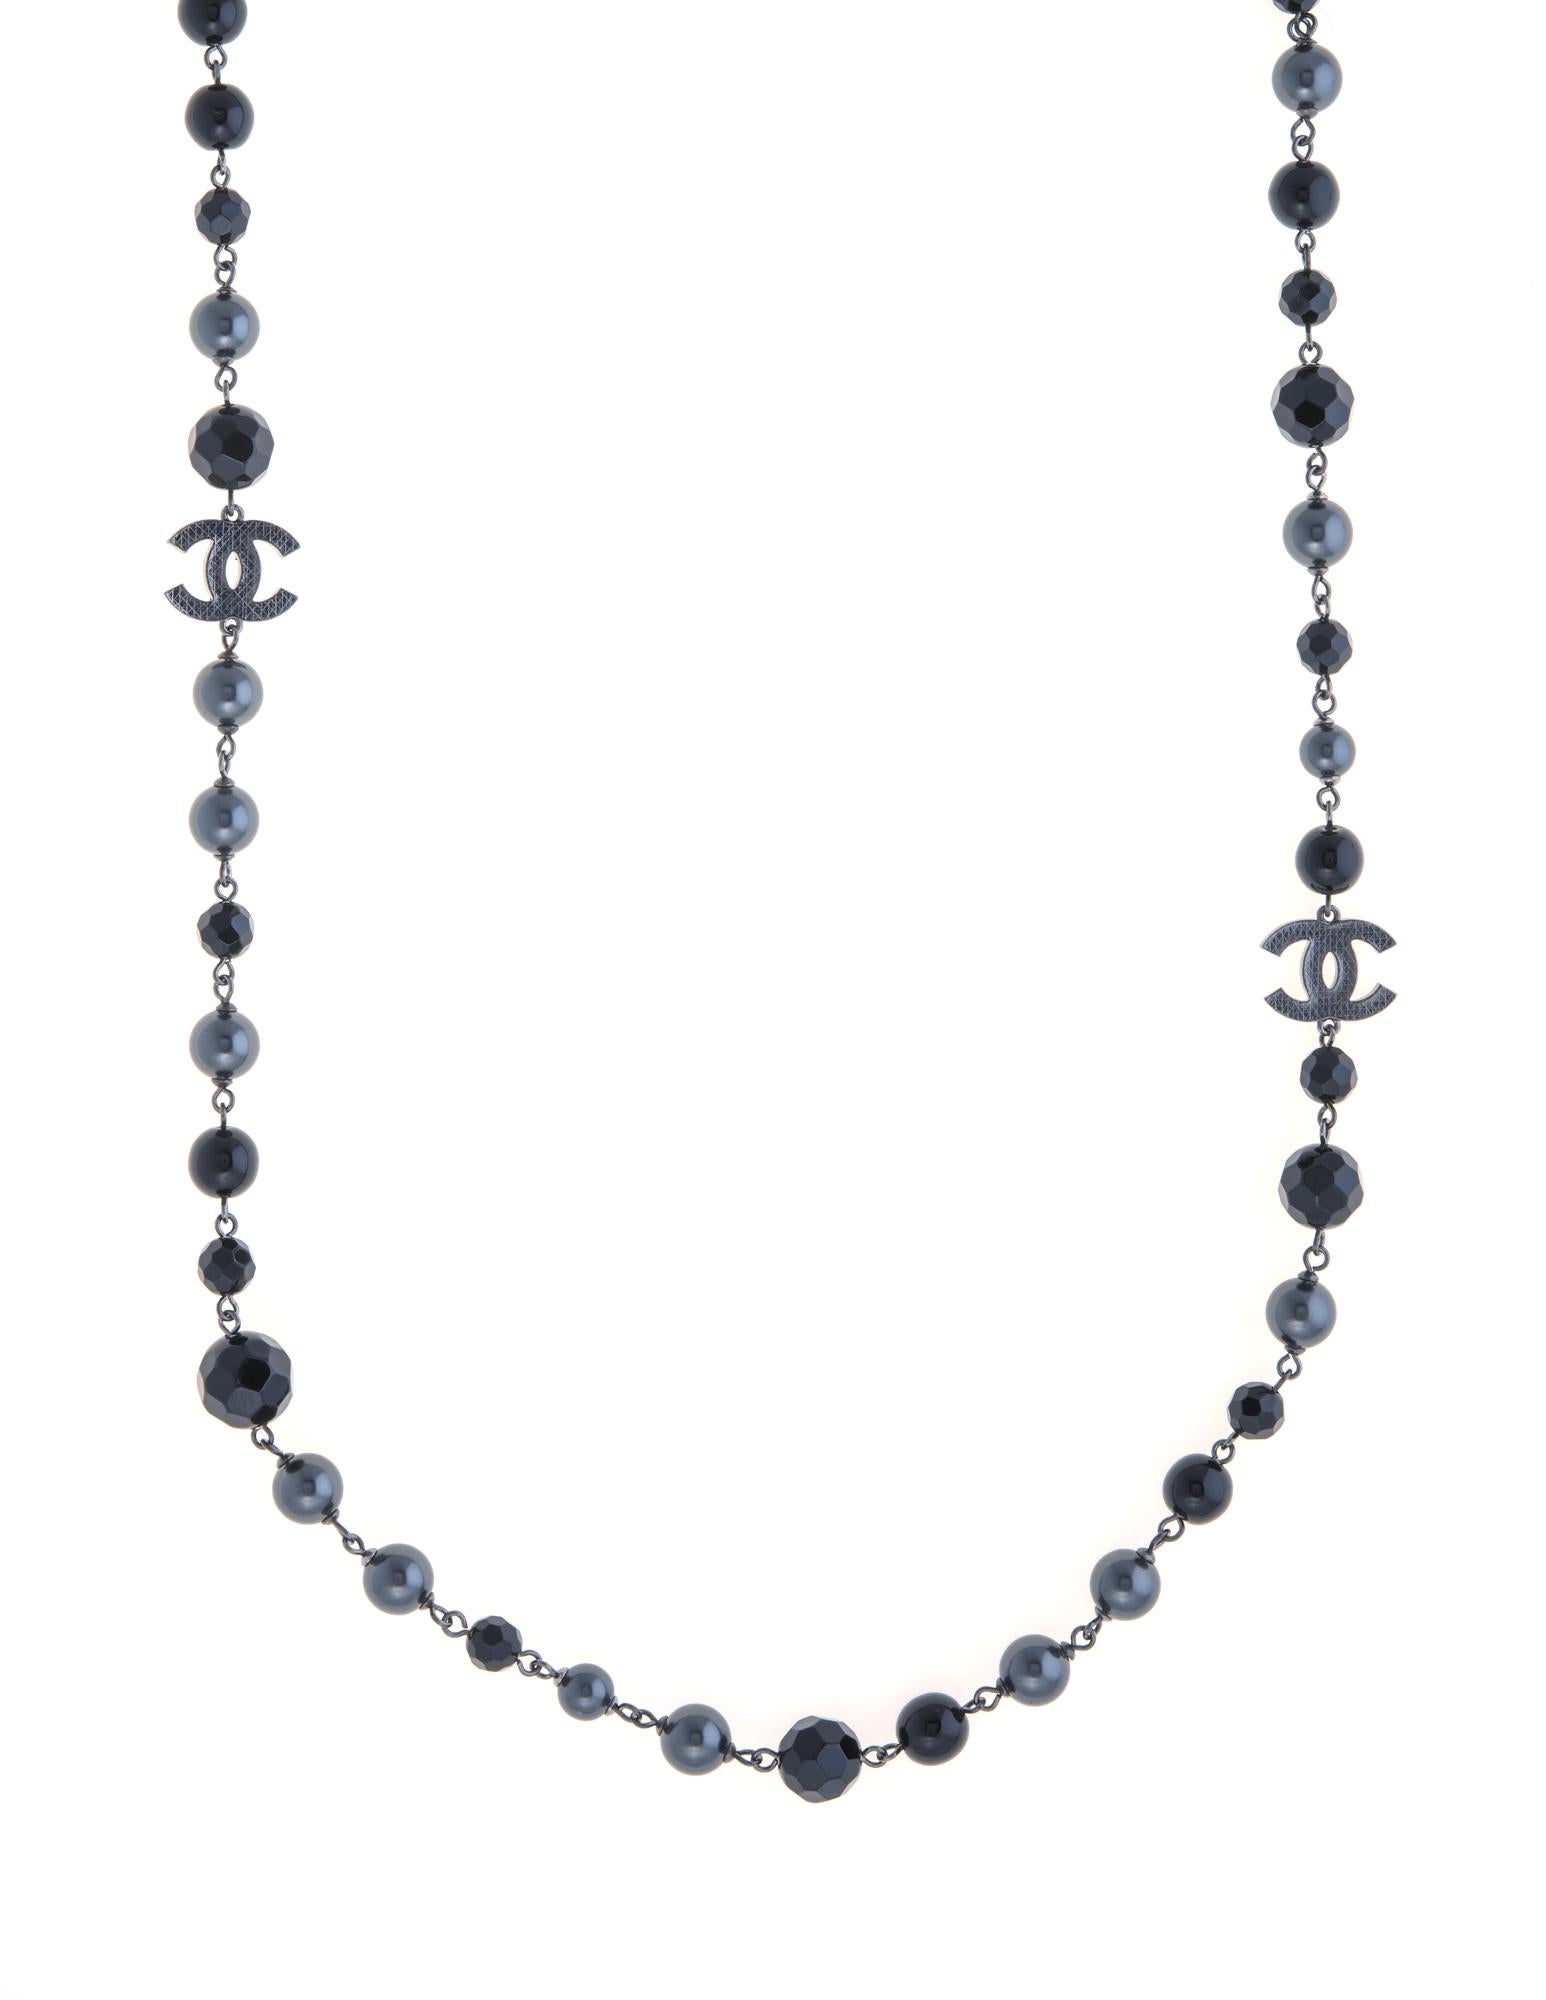 chanel bead necklace